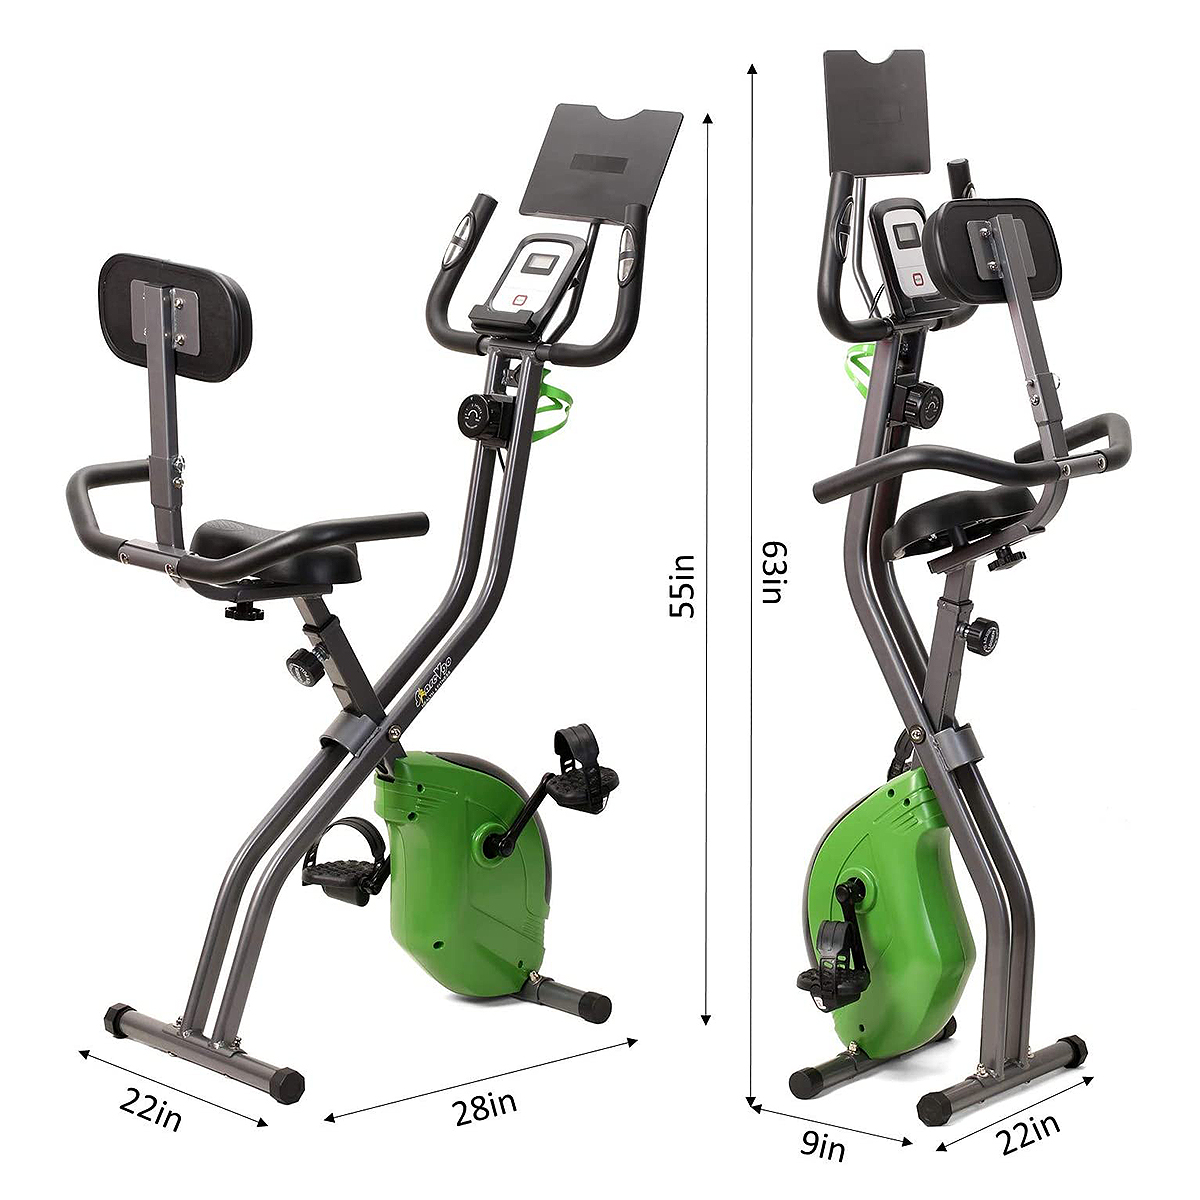 Sale > best budget folding exercise bike > in stock